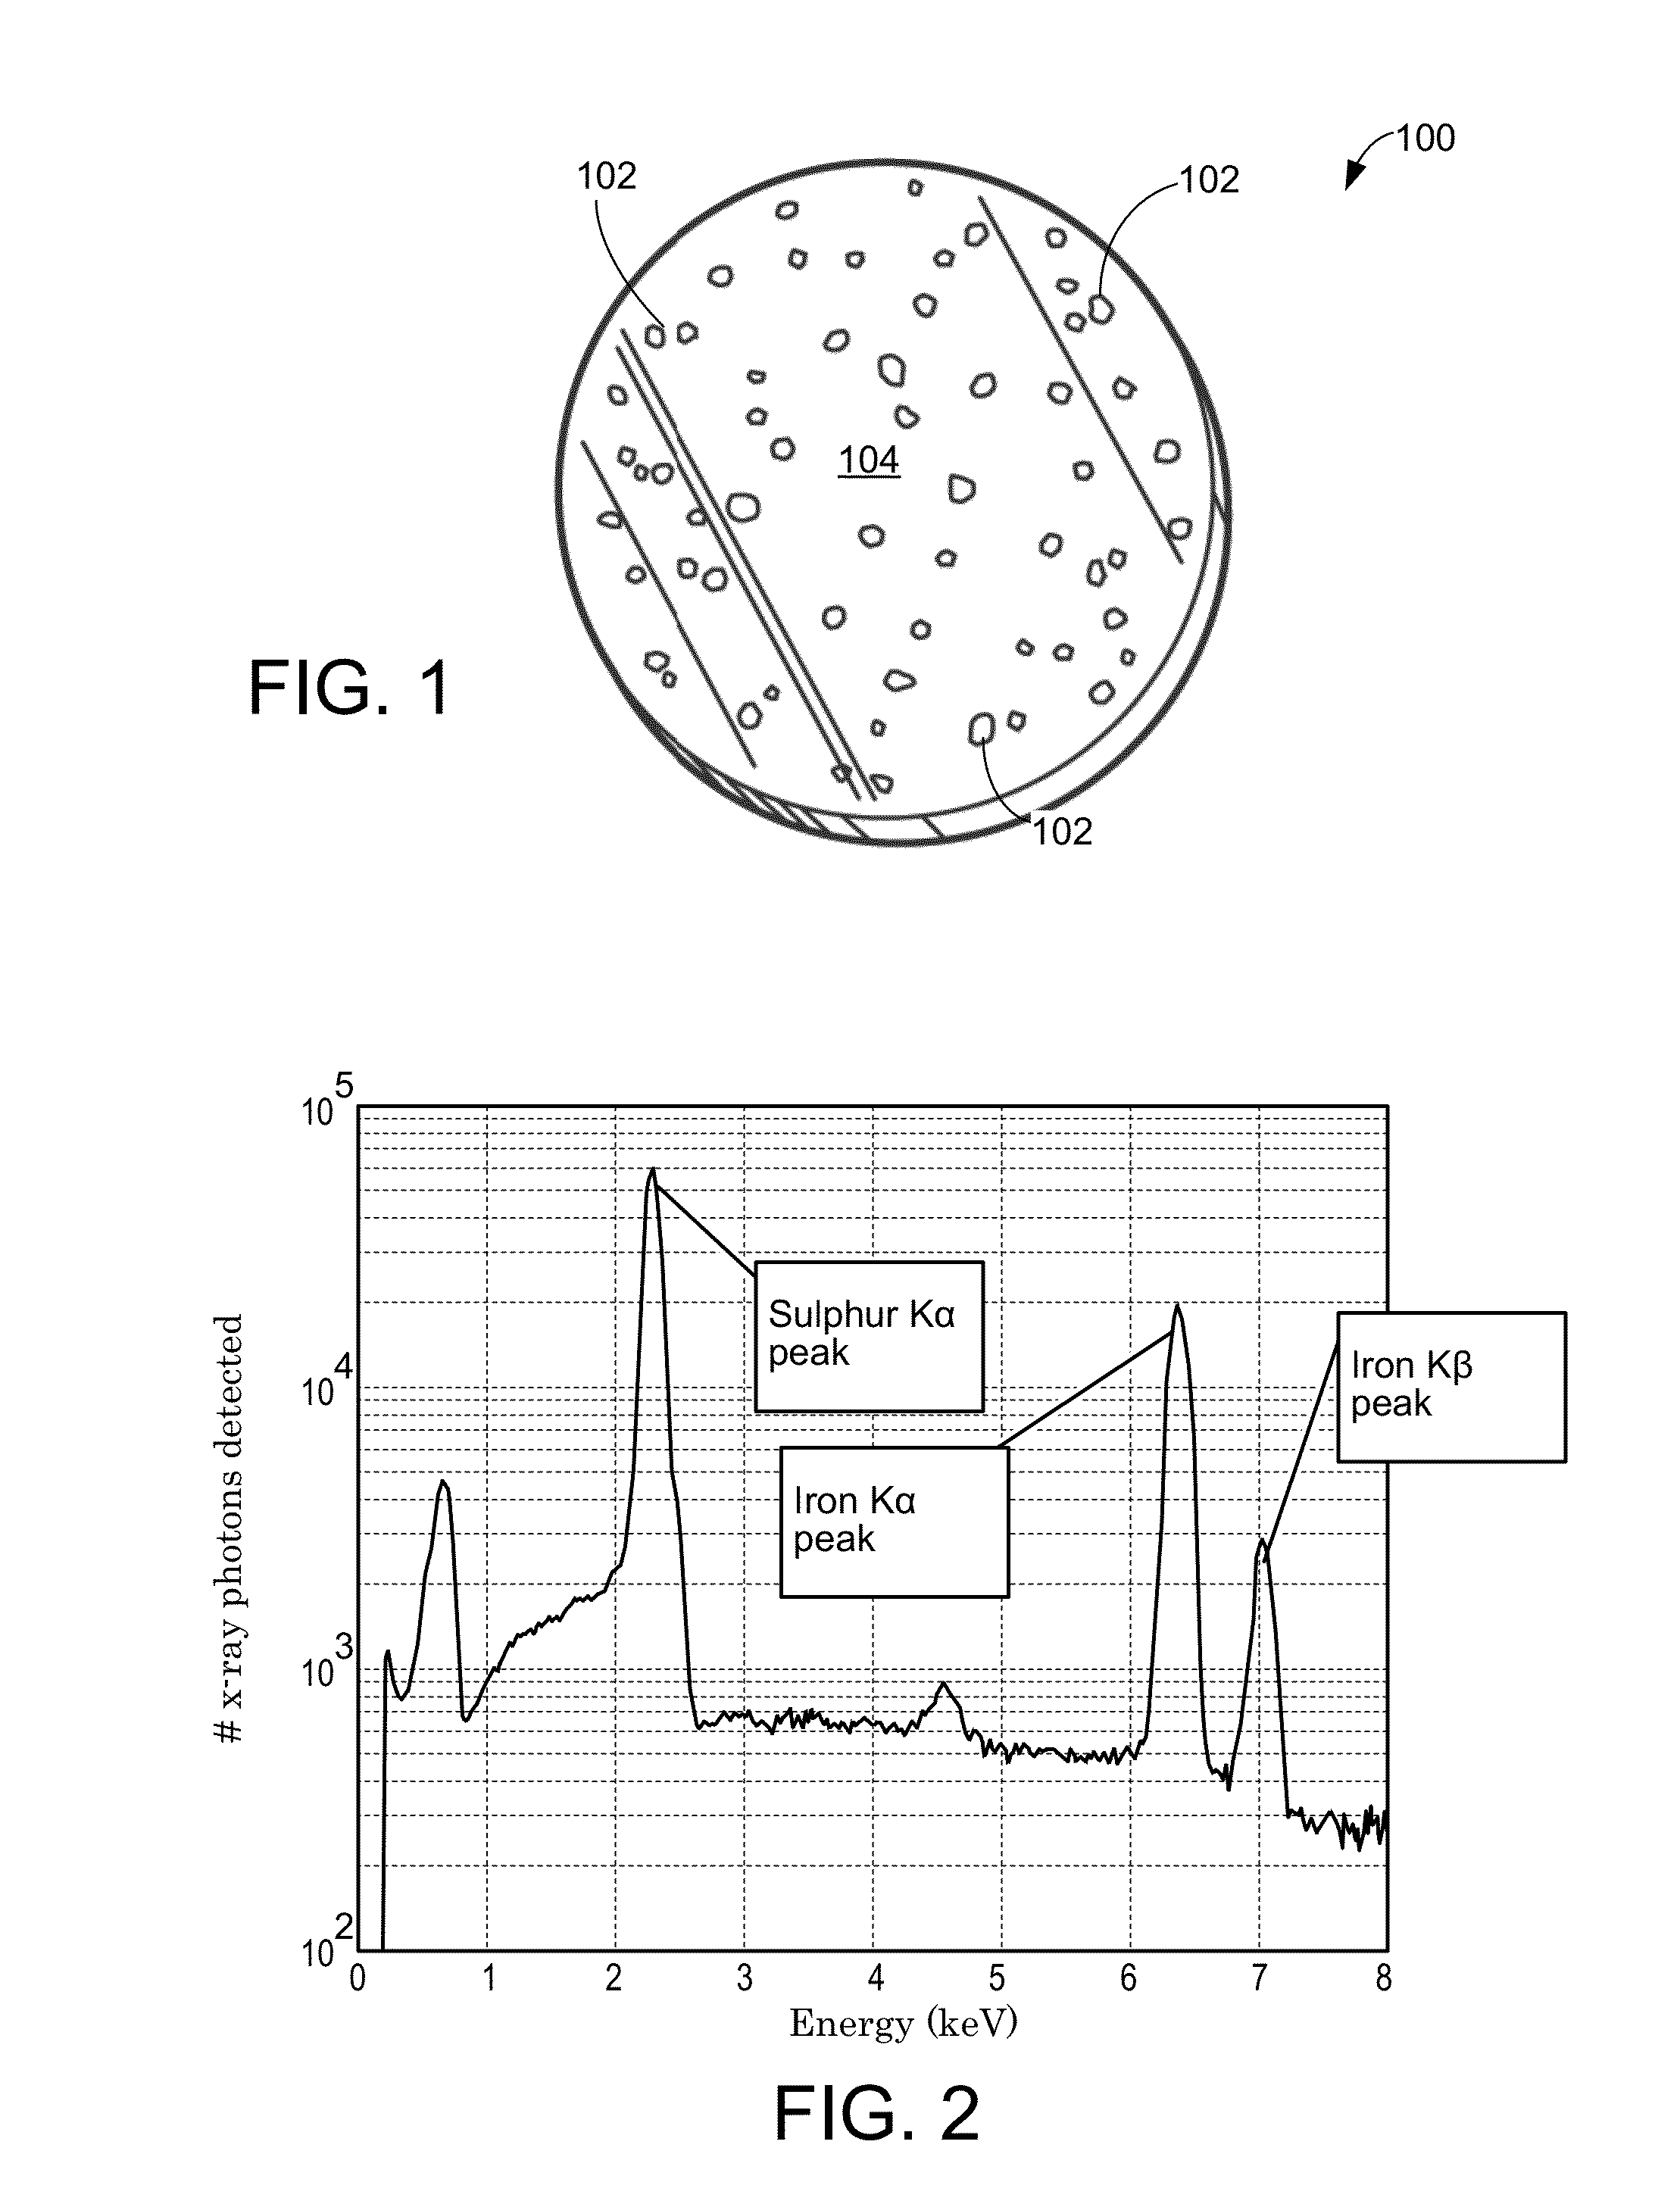 Process for Performing Automated Mineralogy